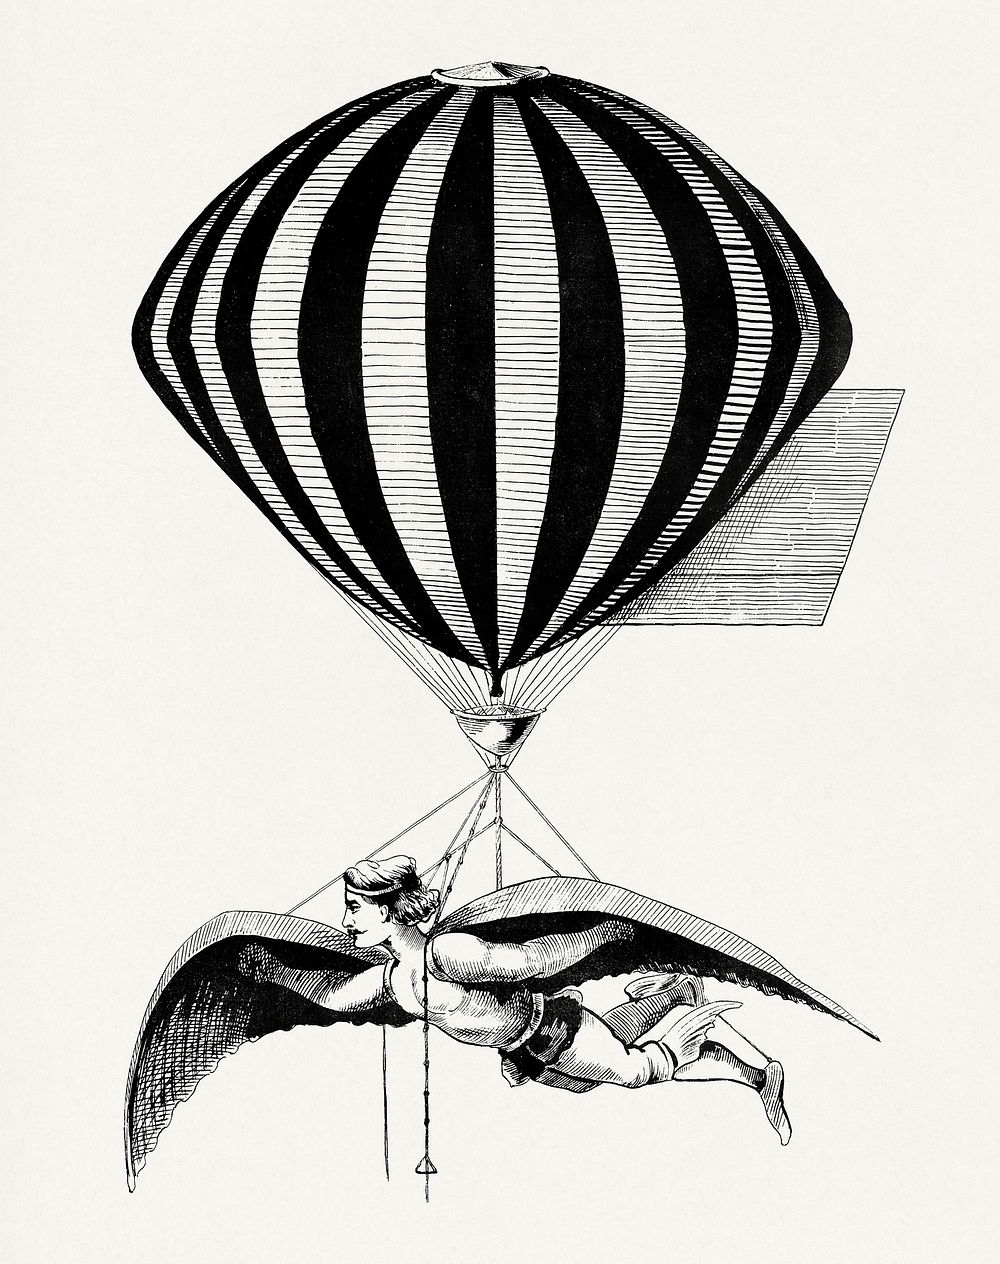 Aerialist wearing wings strapped to his shoulders and feet while suspended from a balloon (1870). Original from the Library…